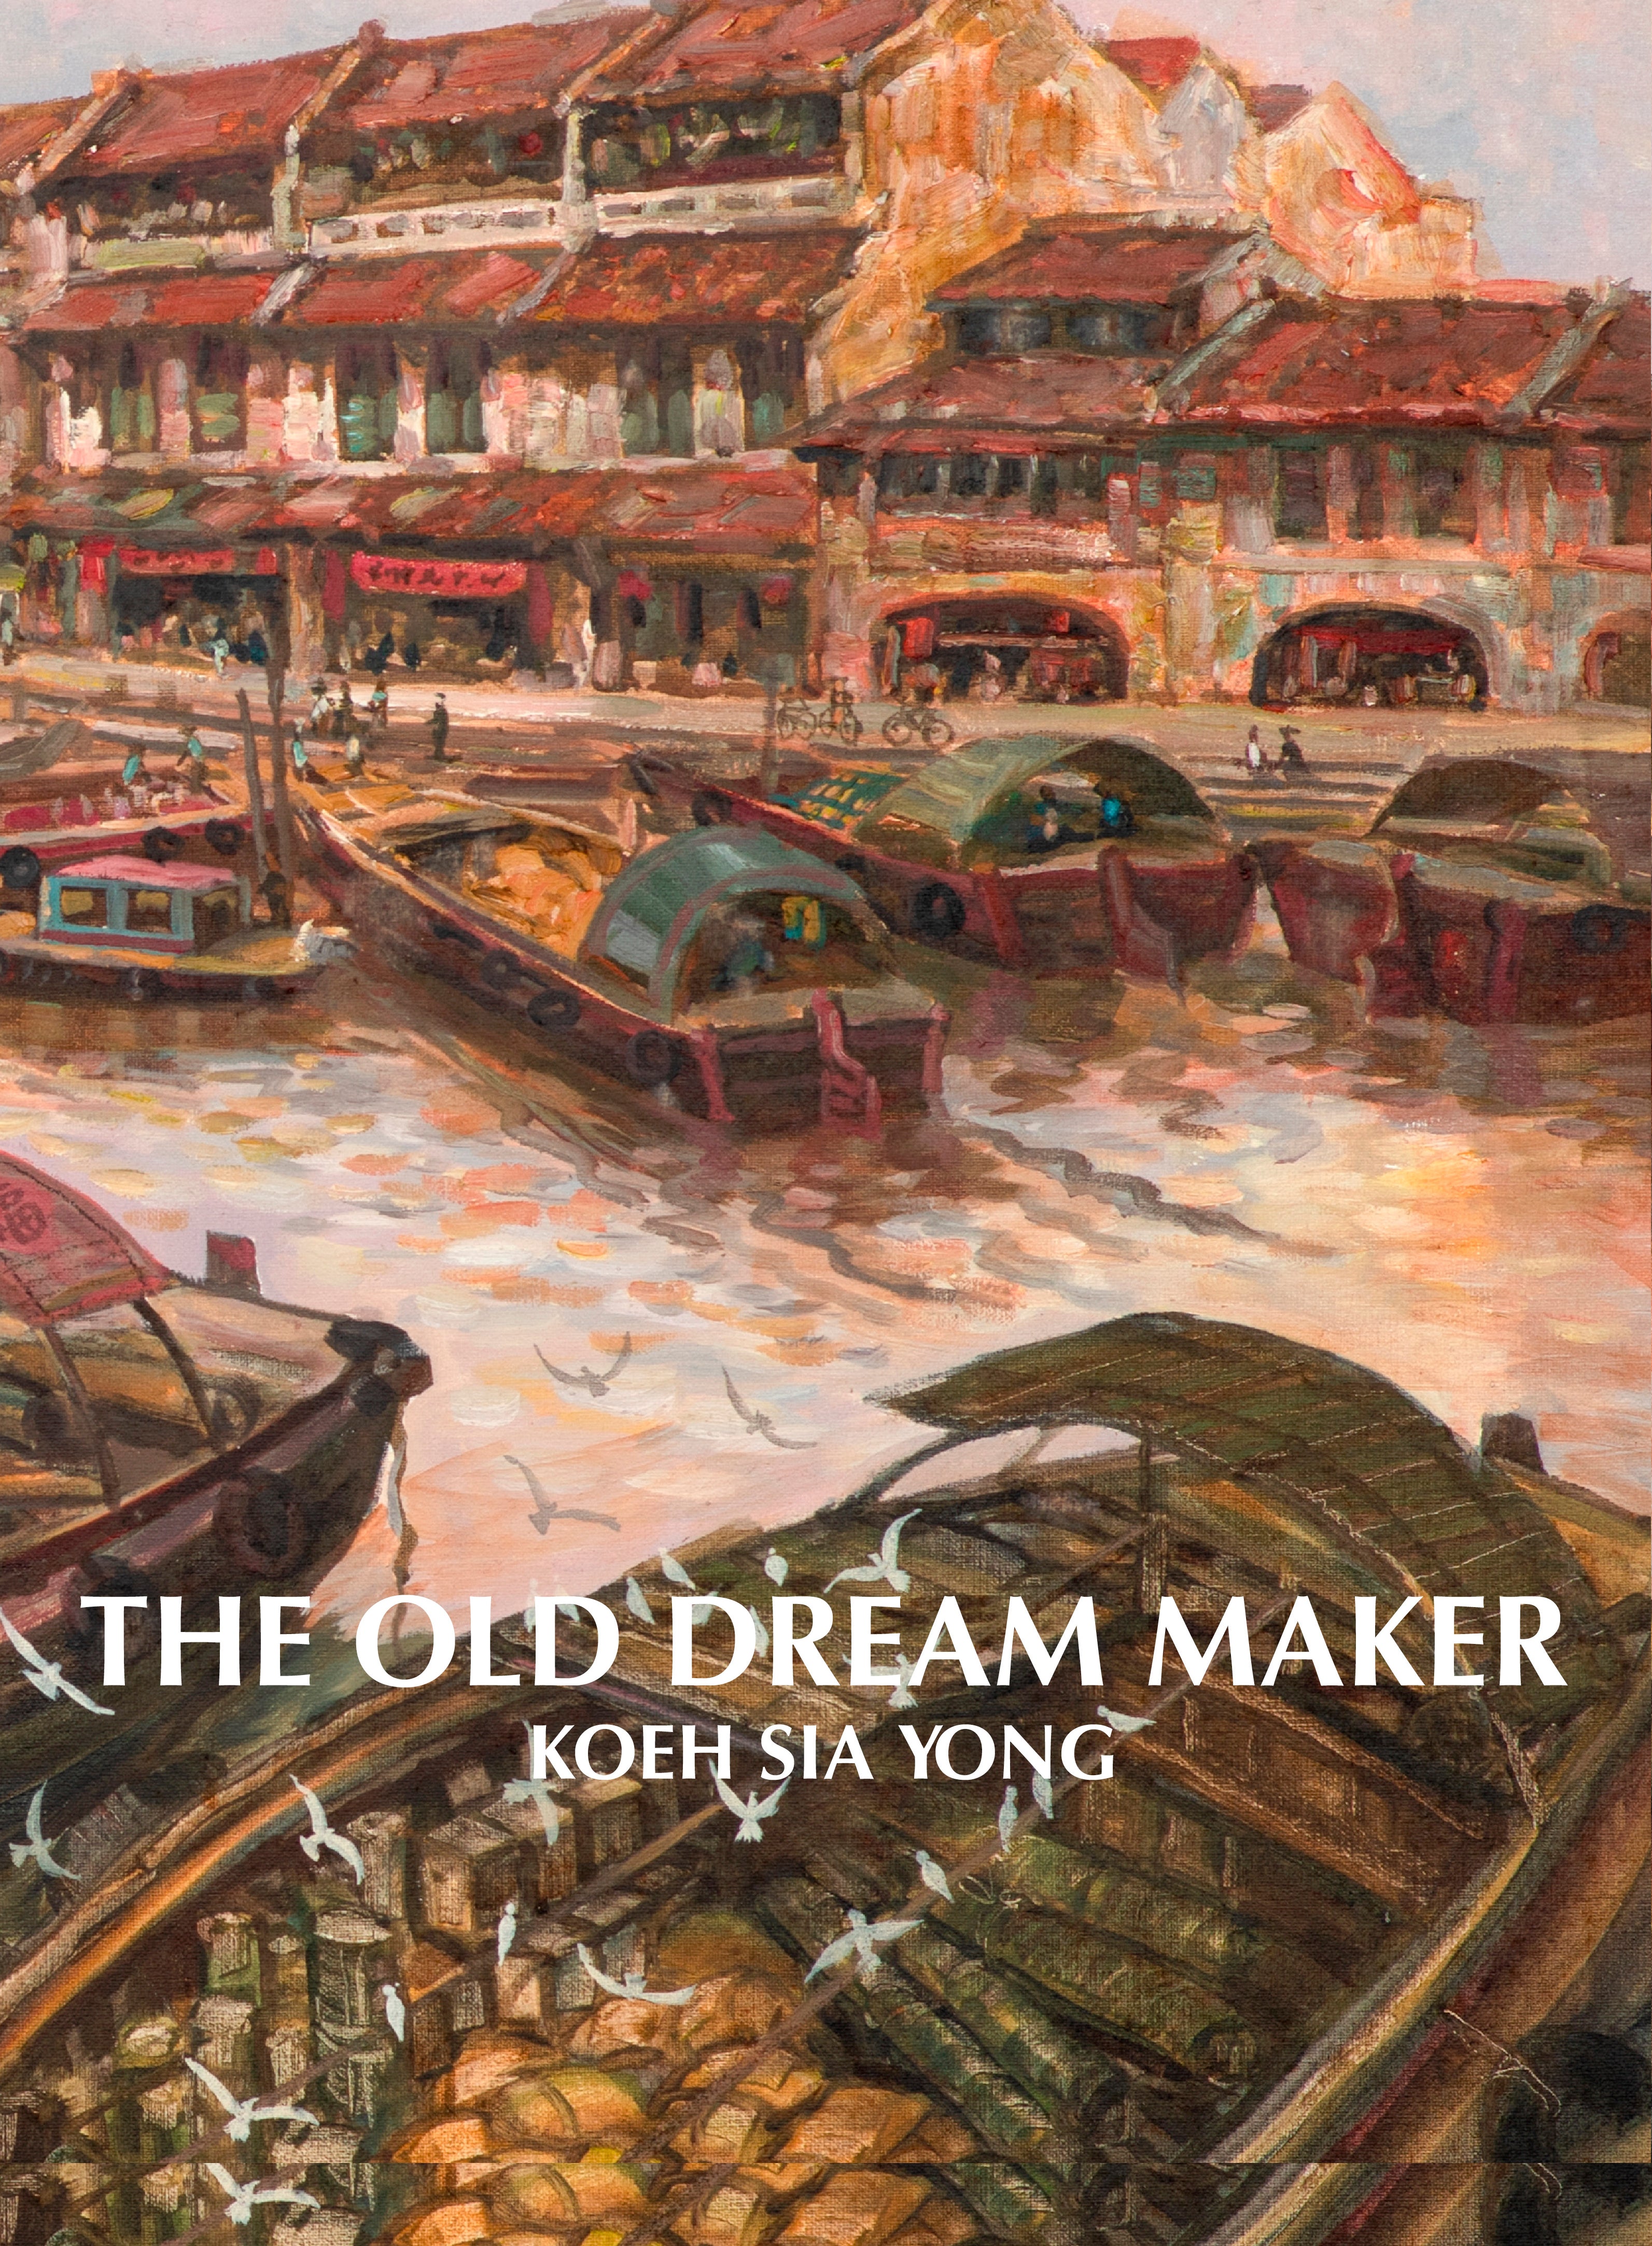 The Old Dream Maker: Koeh Sia Yong